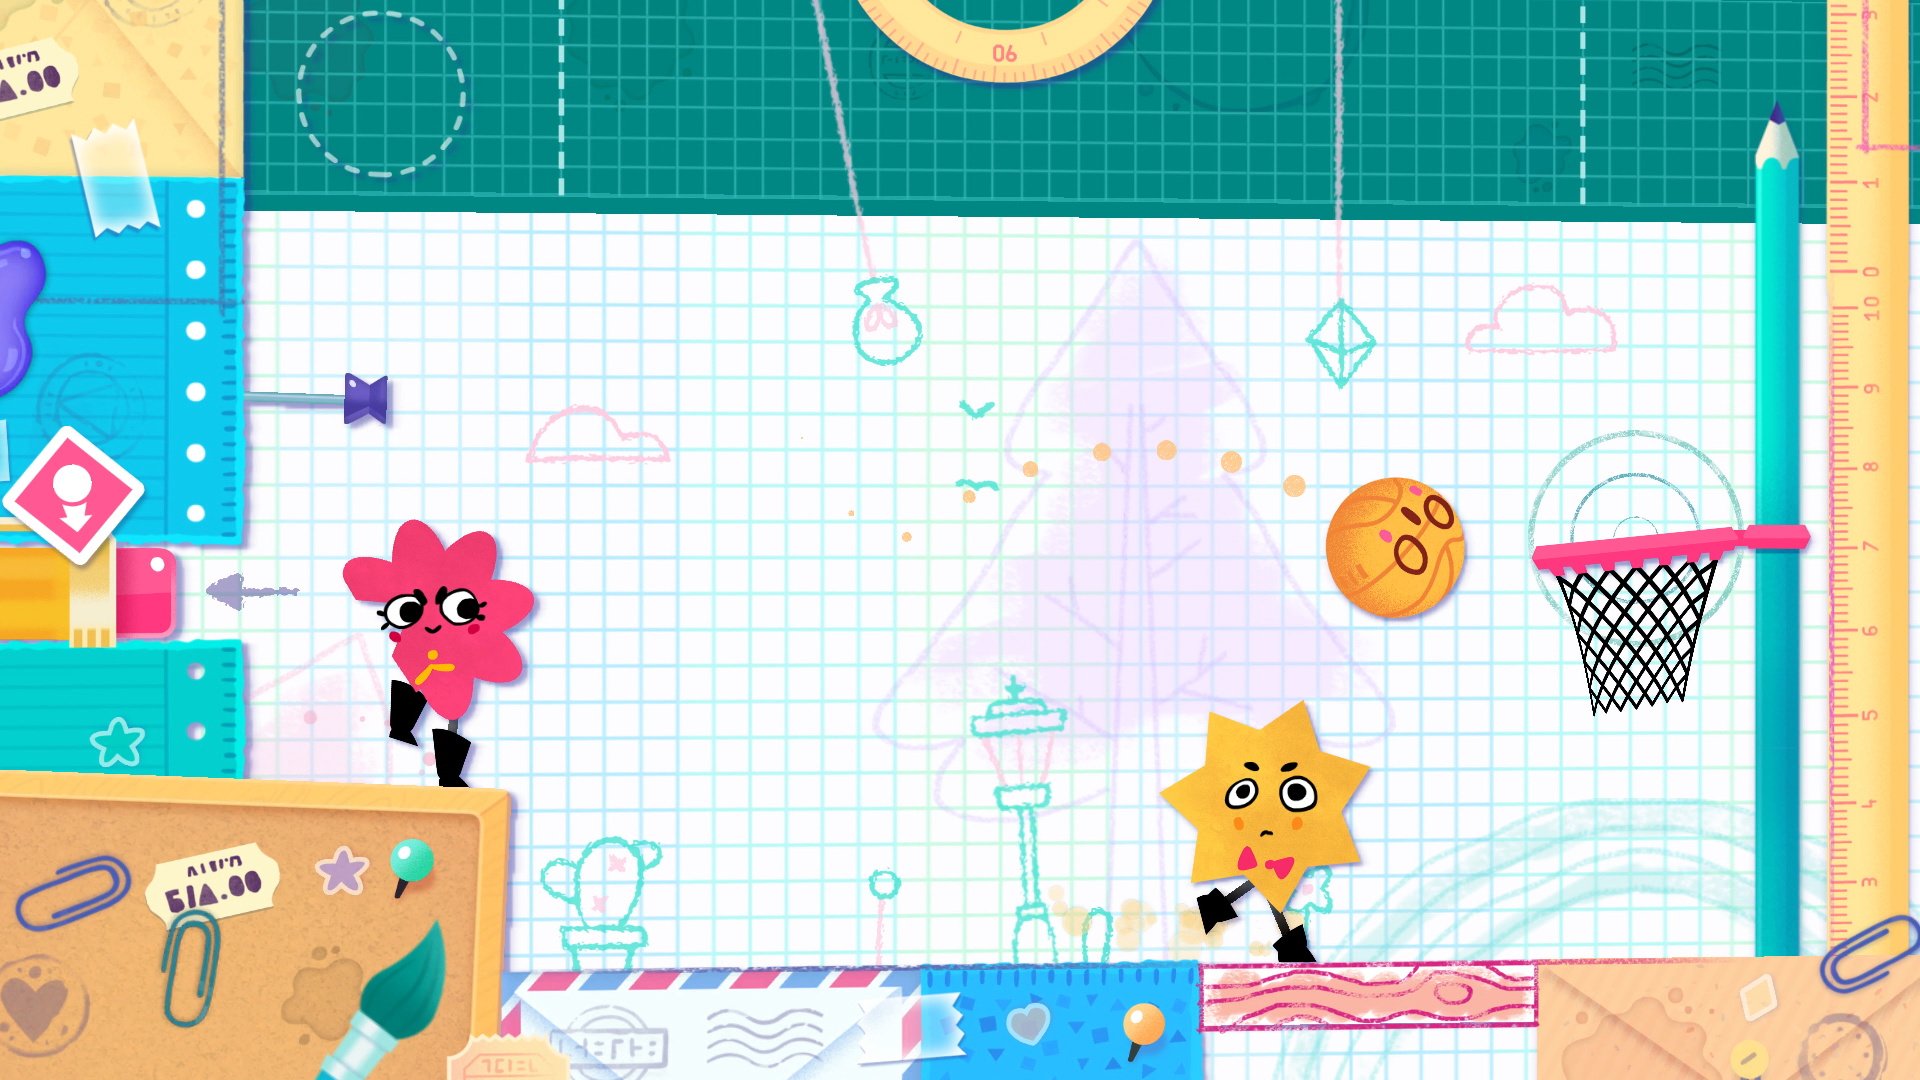 Snipperclips: Cut it out, together! - Nintendo Switch - wide 2